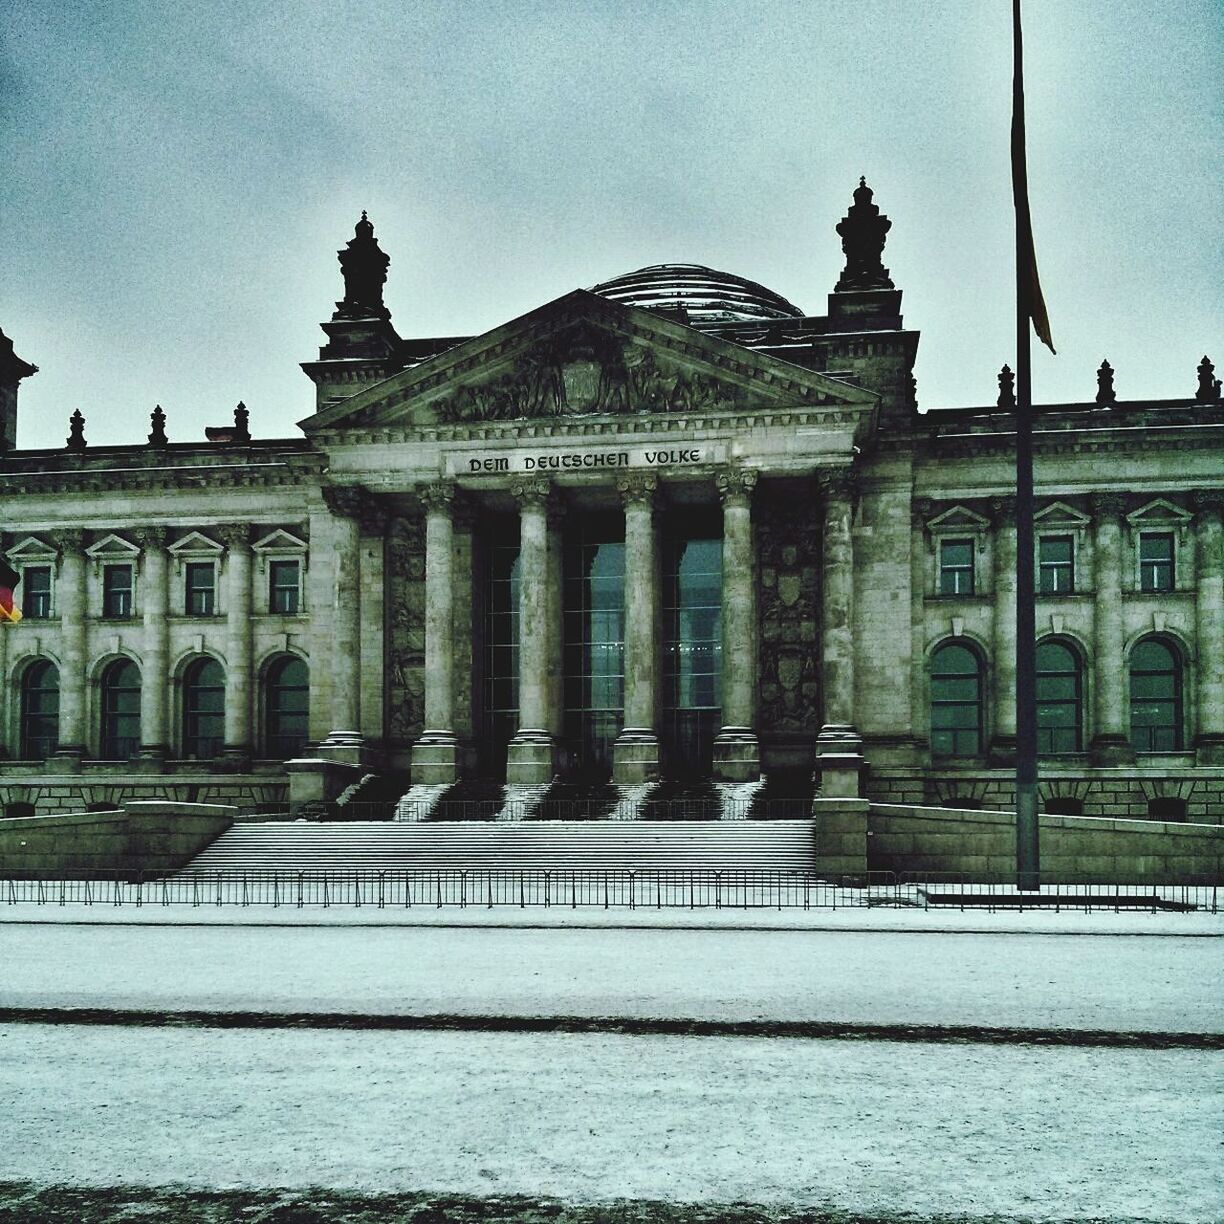 Exterior of reichstag building against sky